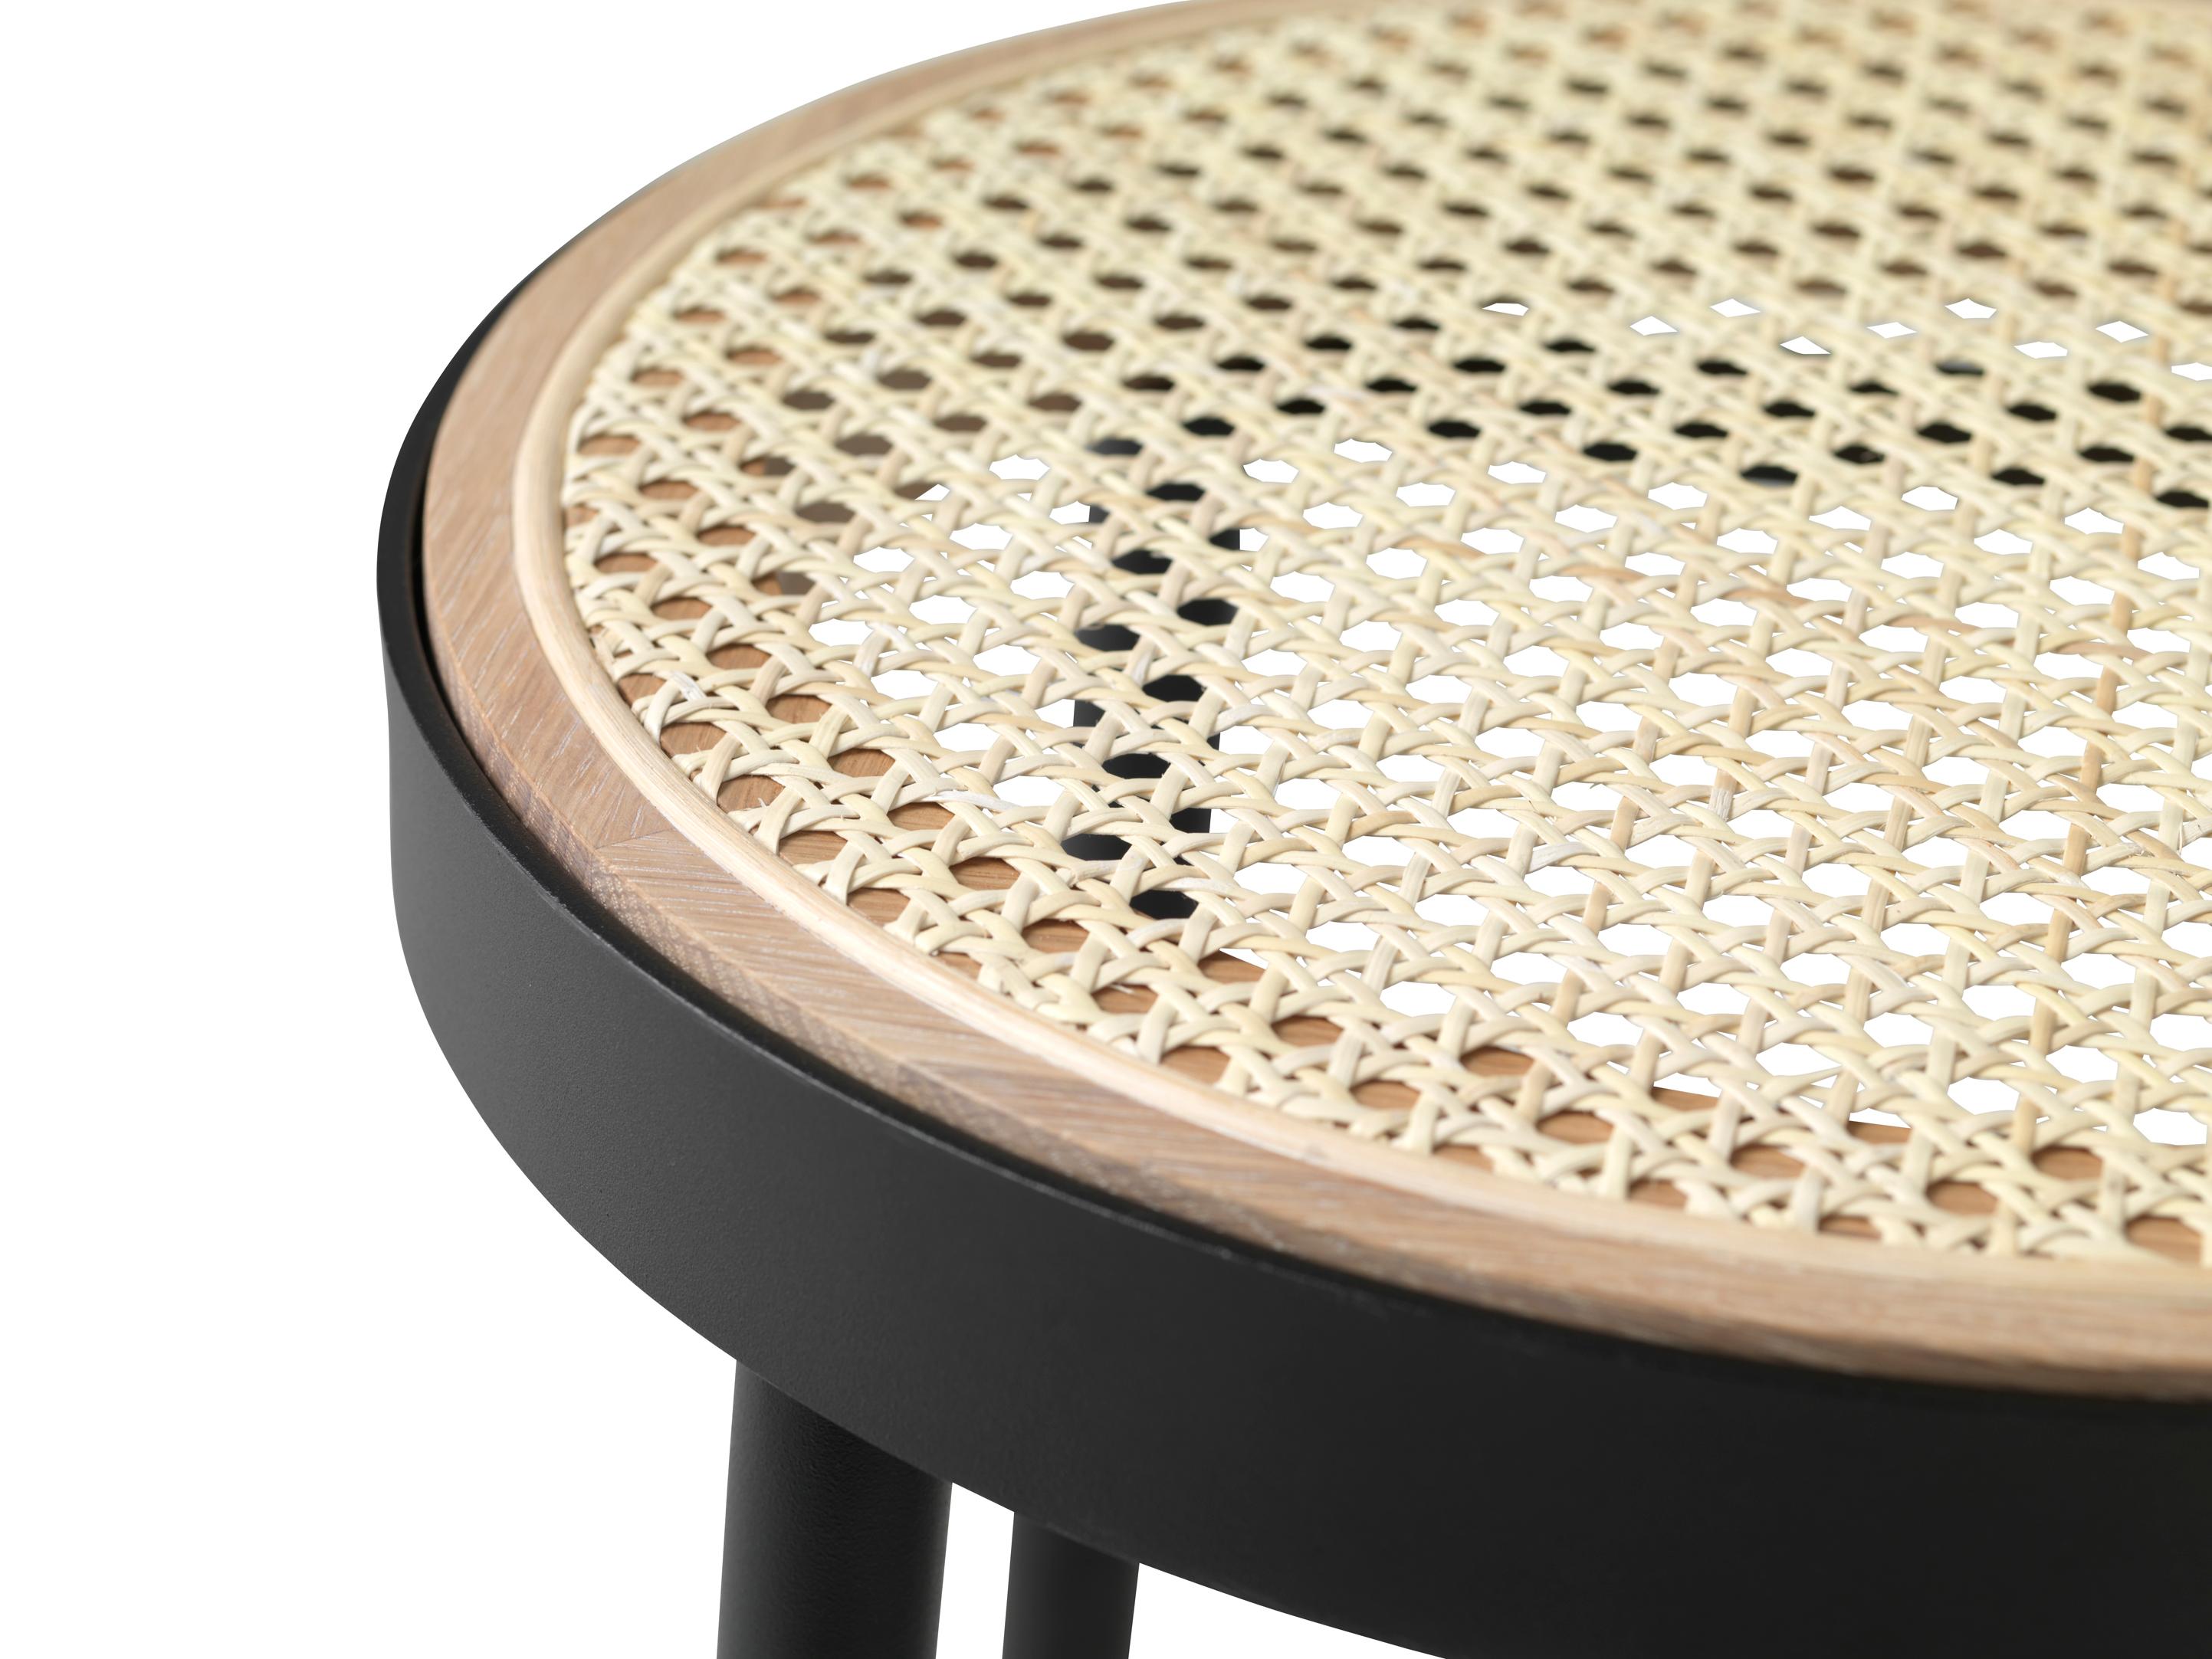 An elegant, Classic bar stool with a wicker seat and simple metal frame. With its French rattan and oak seat and simple black metal legs, this unique bar stool will look great at any bar. Together with the idiom, the choice of materials creates a